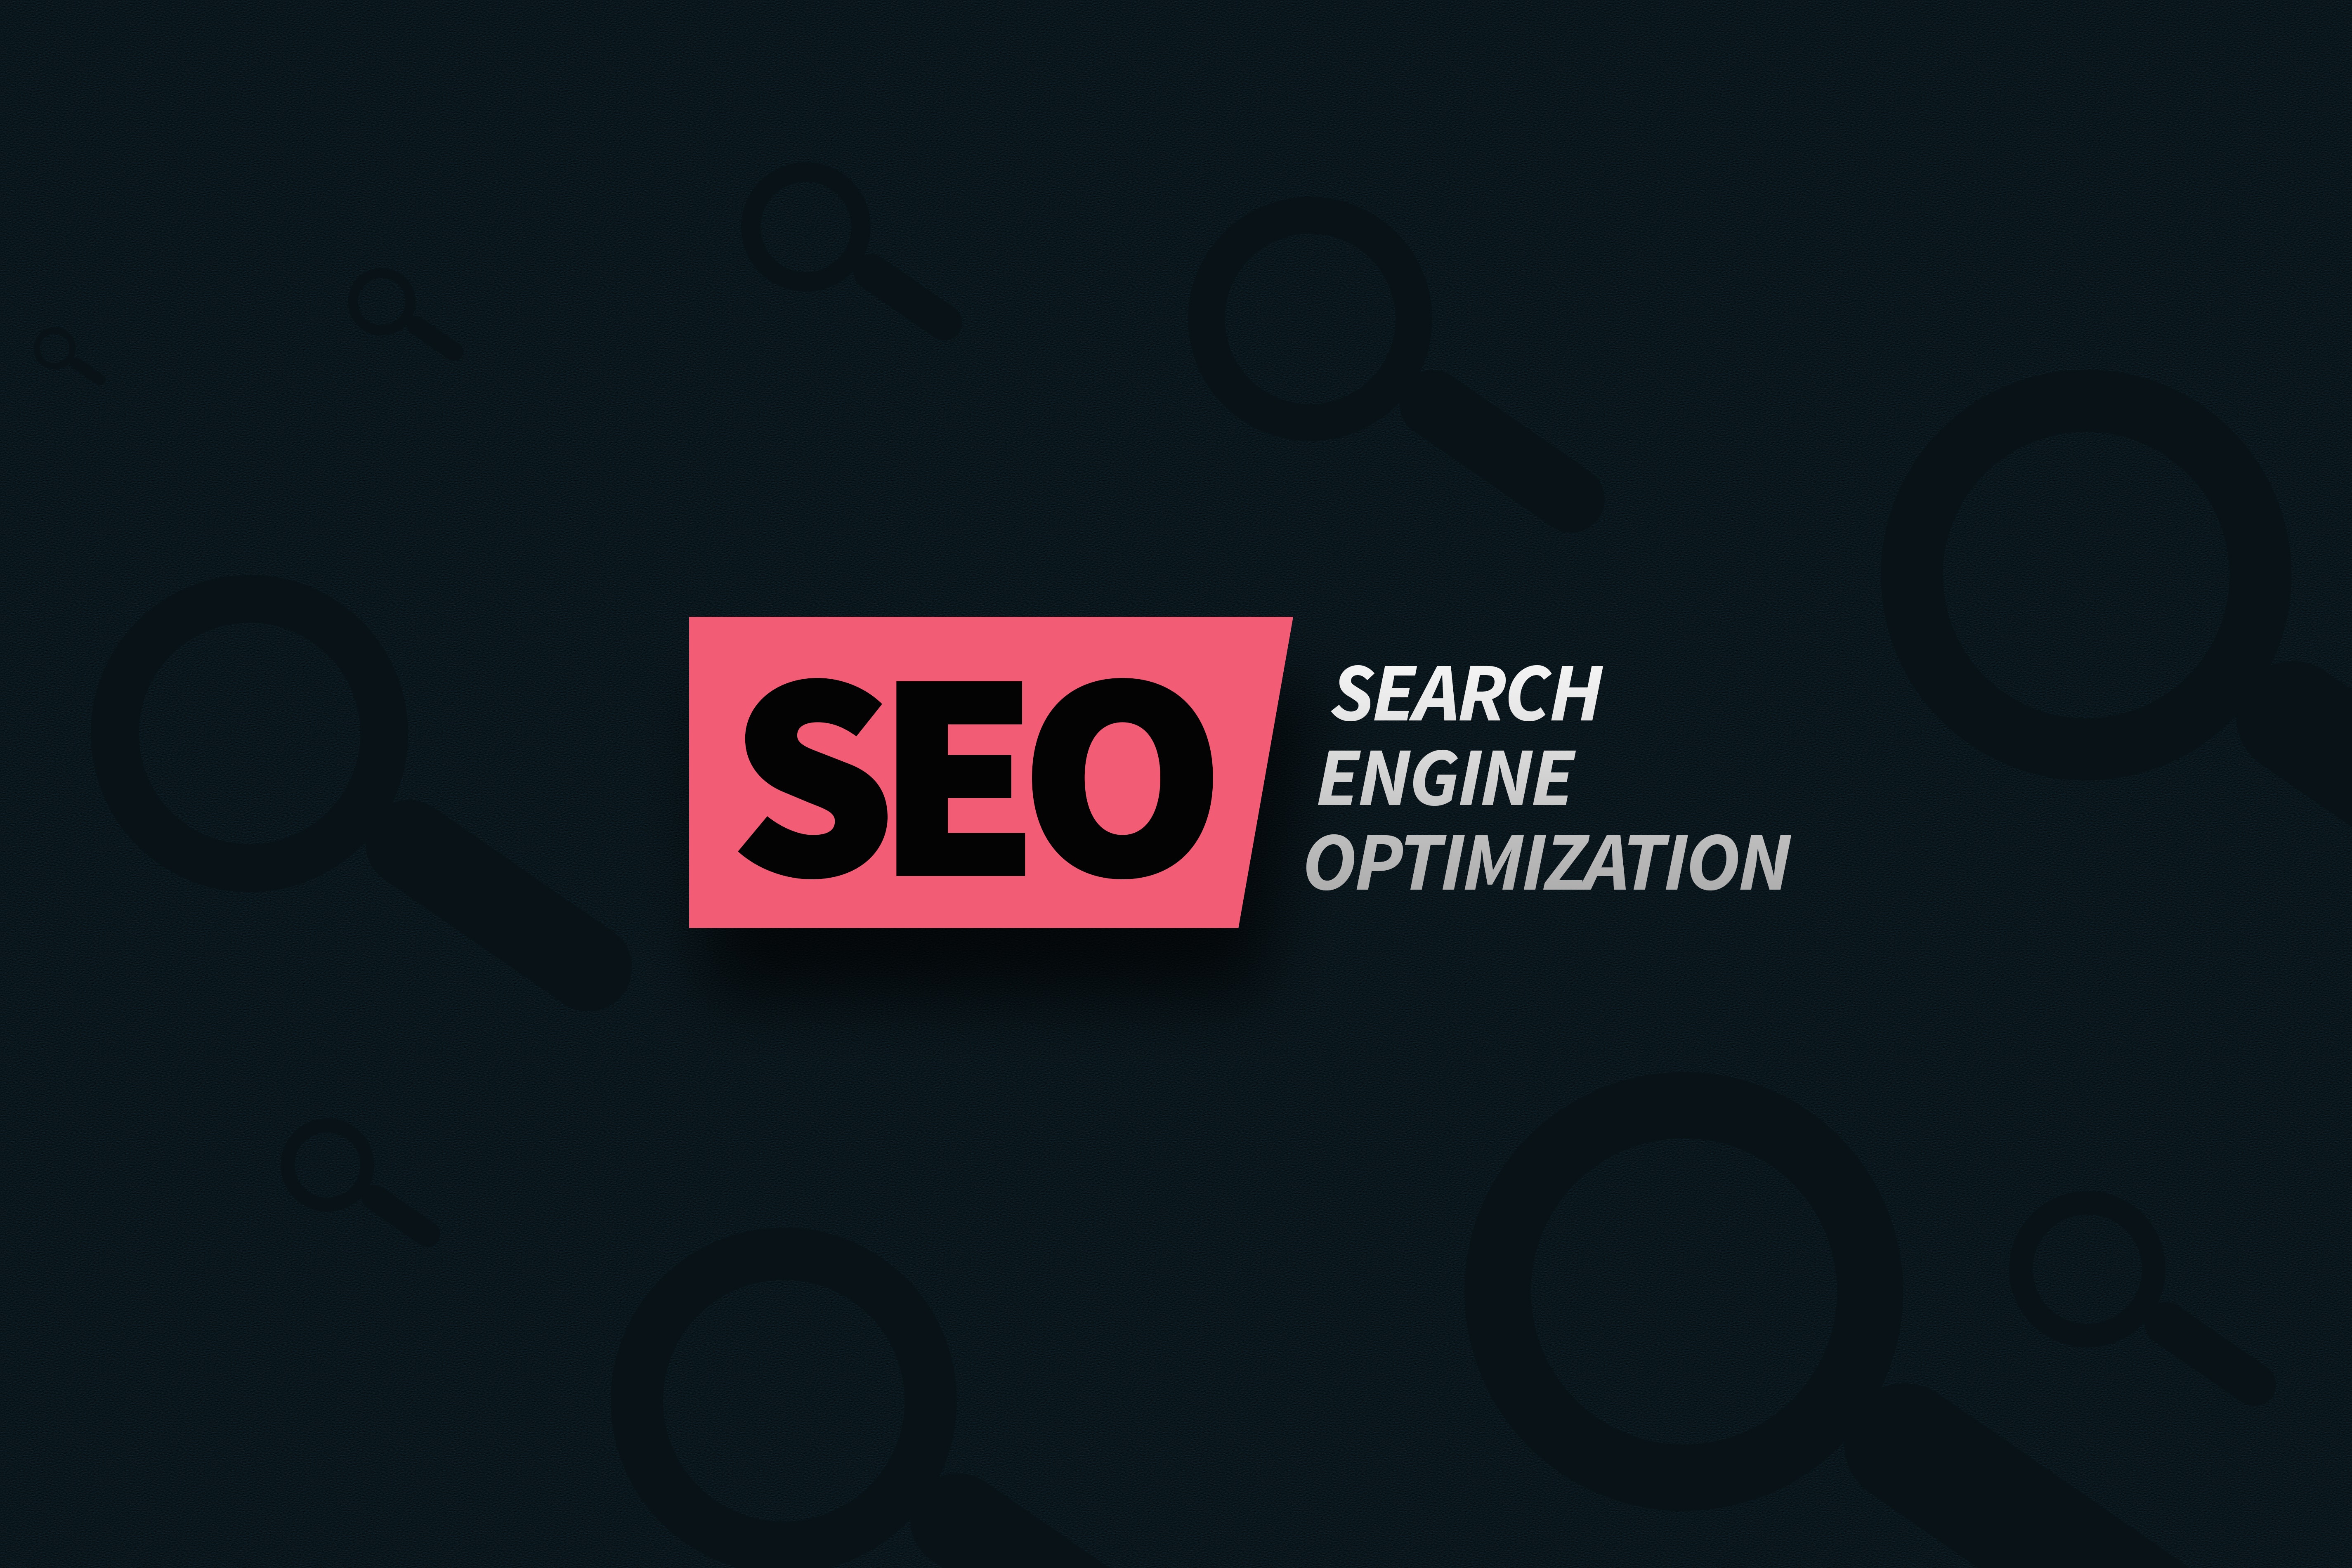 Revealed: 4 Seemingly Insignificant Things That Are Killing Your SEO